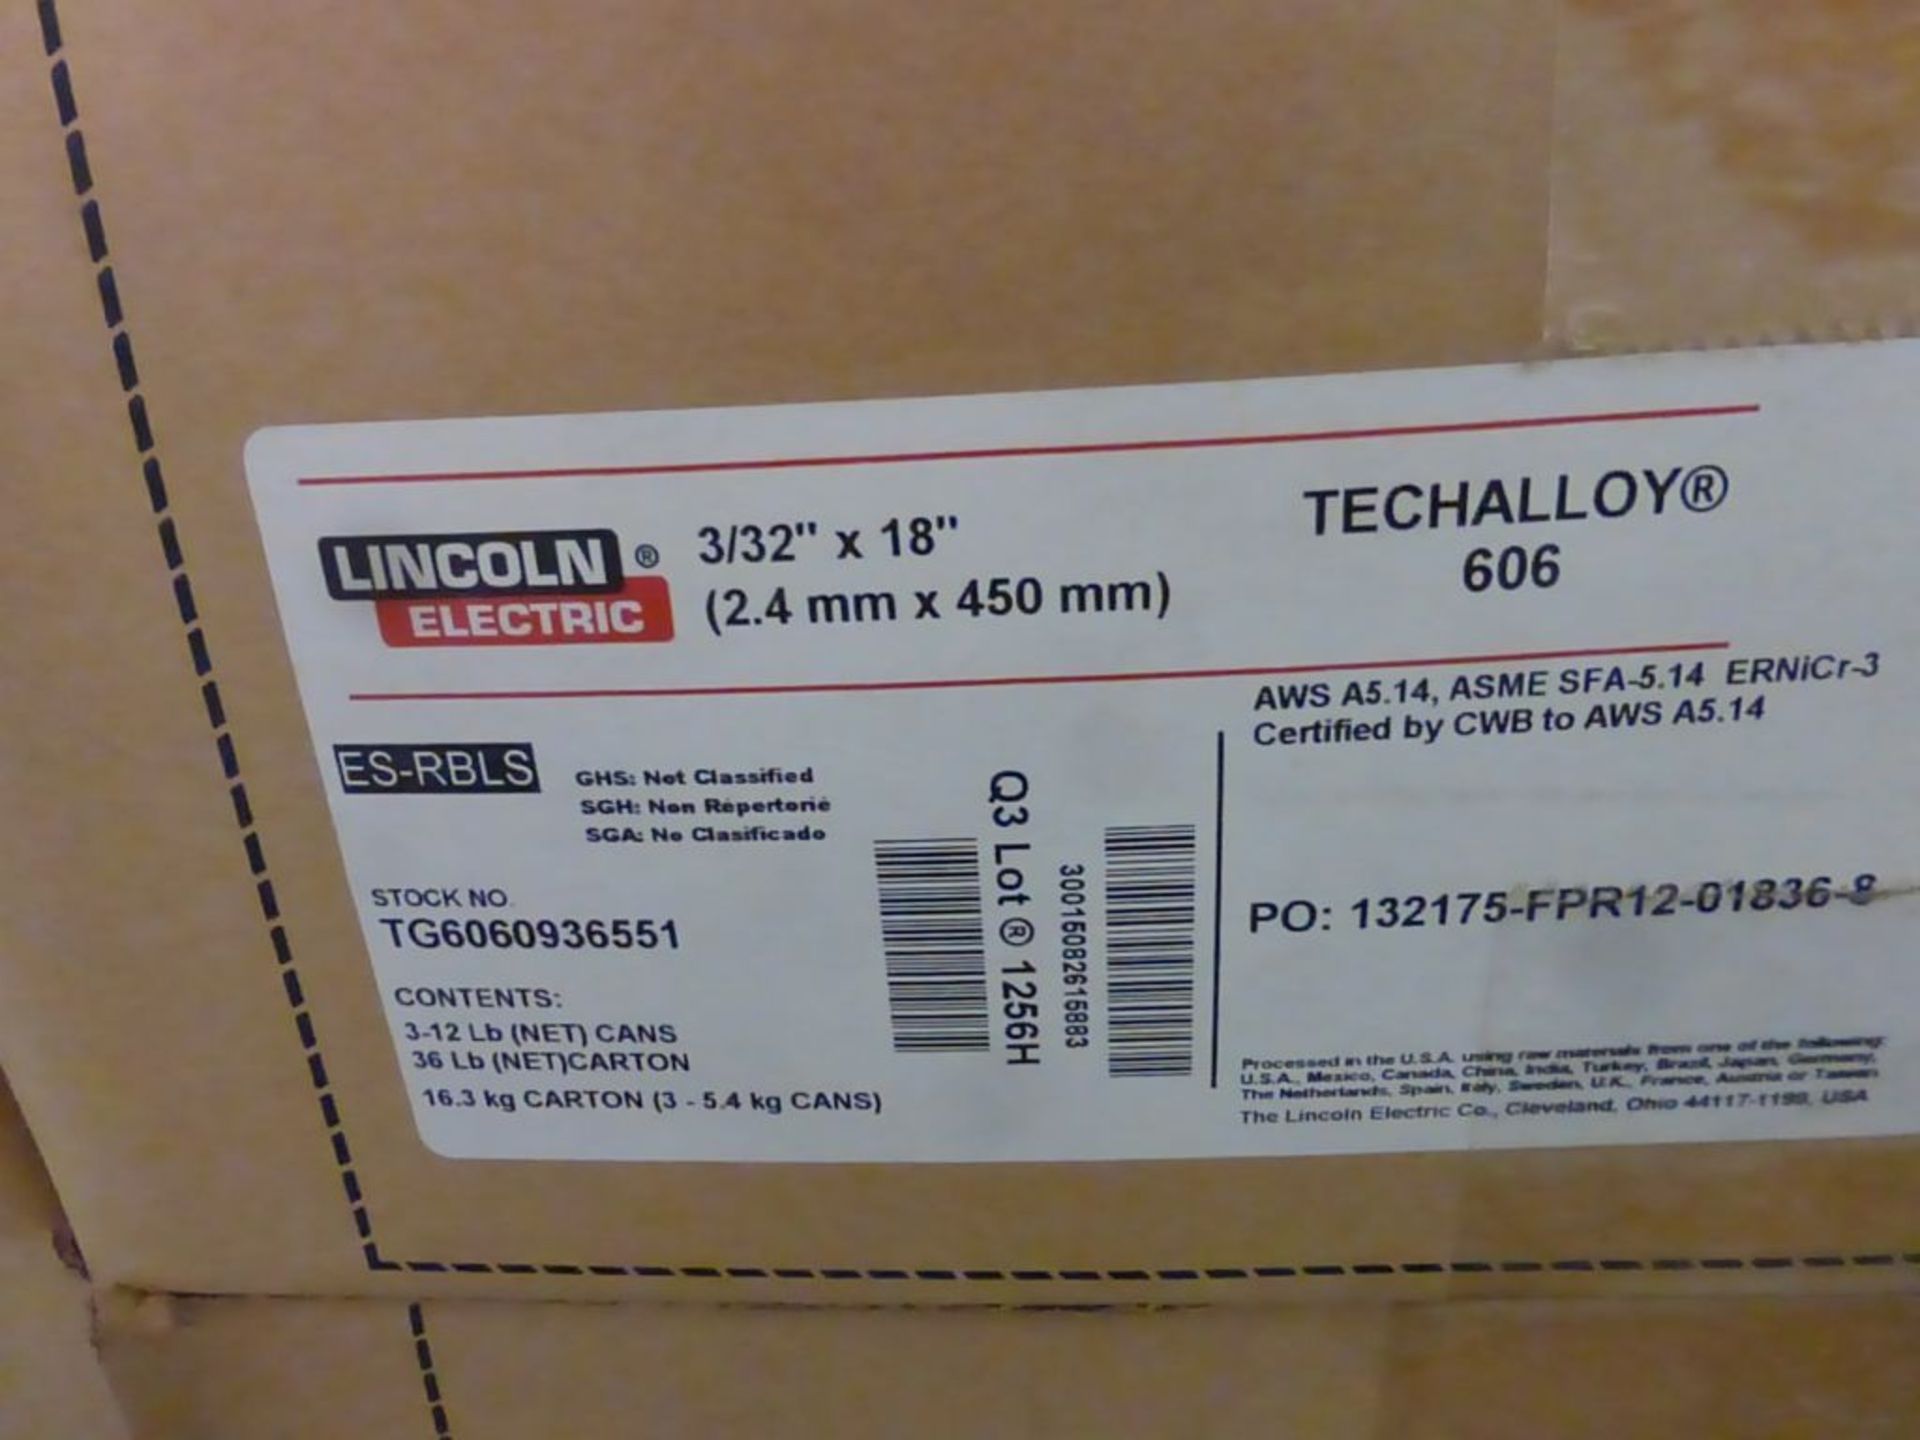 Lot of (8) Boxes of Lincoln Electric Techalloy 606 Welding Wire | Stock No. TG6060936551; 3/32" x - Image 7 of 12